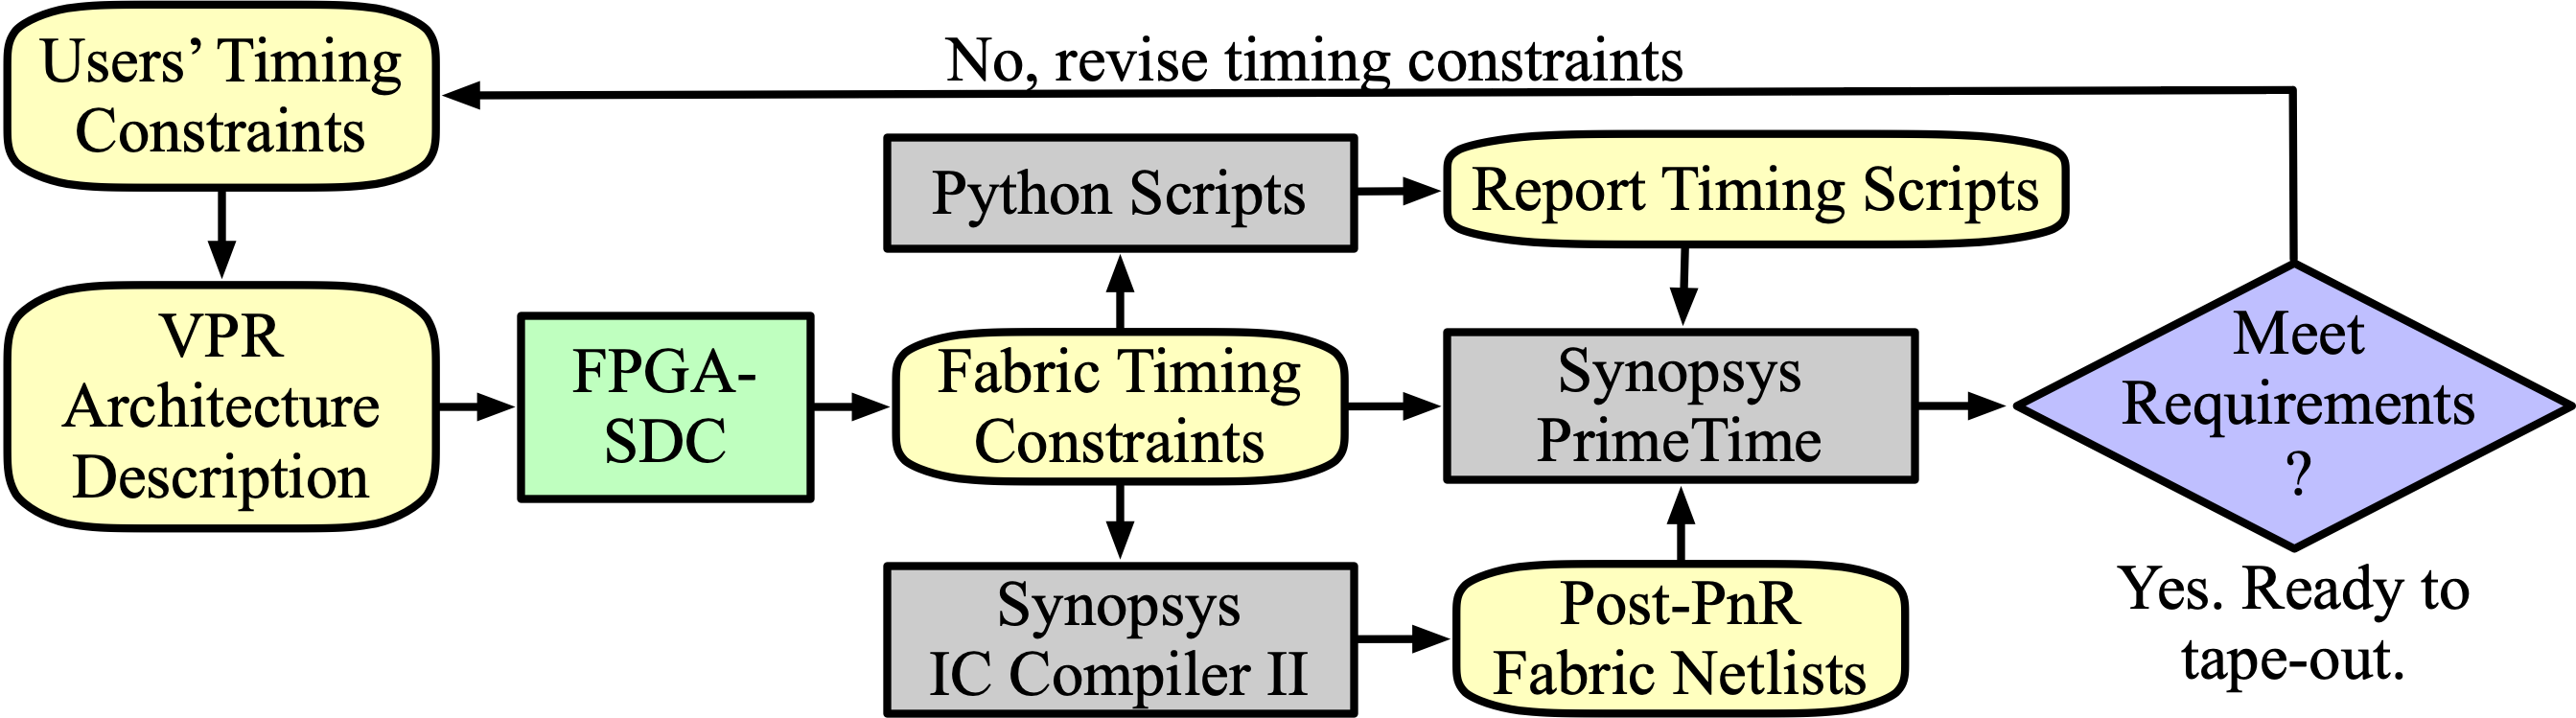 FPGA-SDC enabling iterative timing constrained backend flow